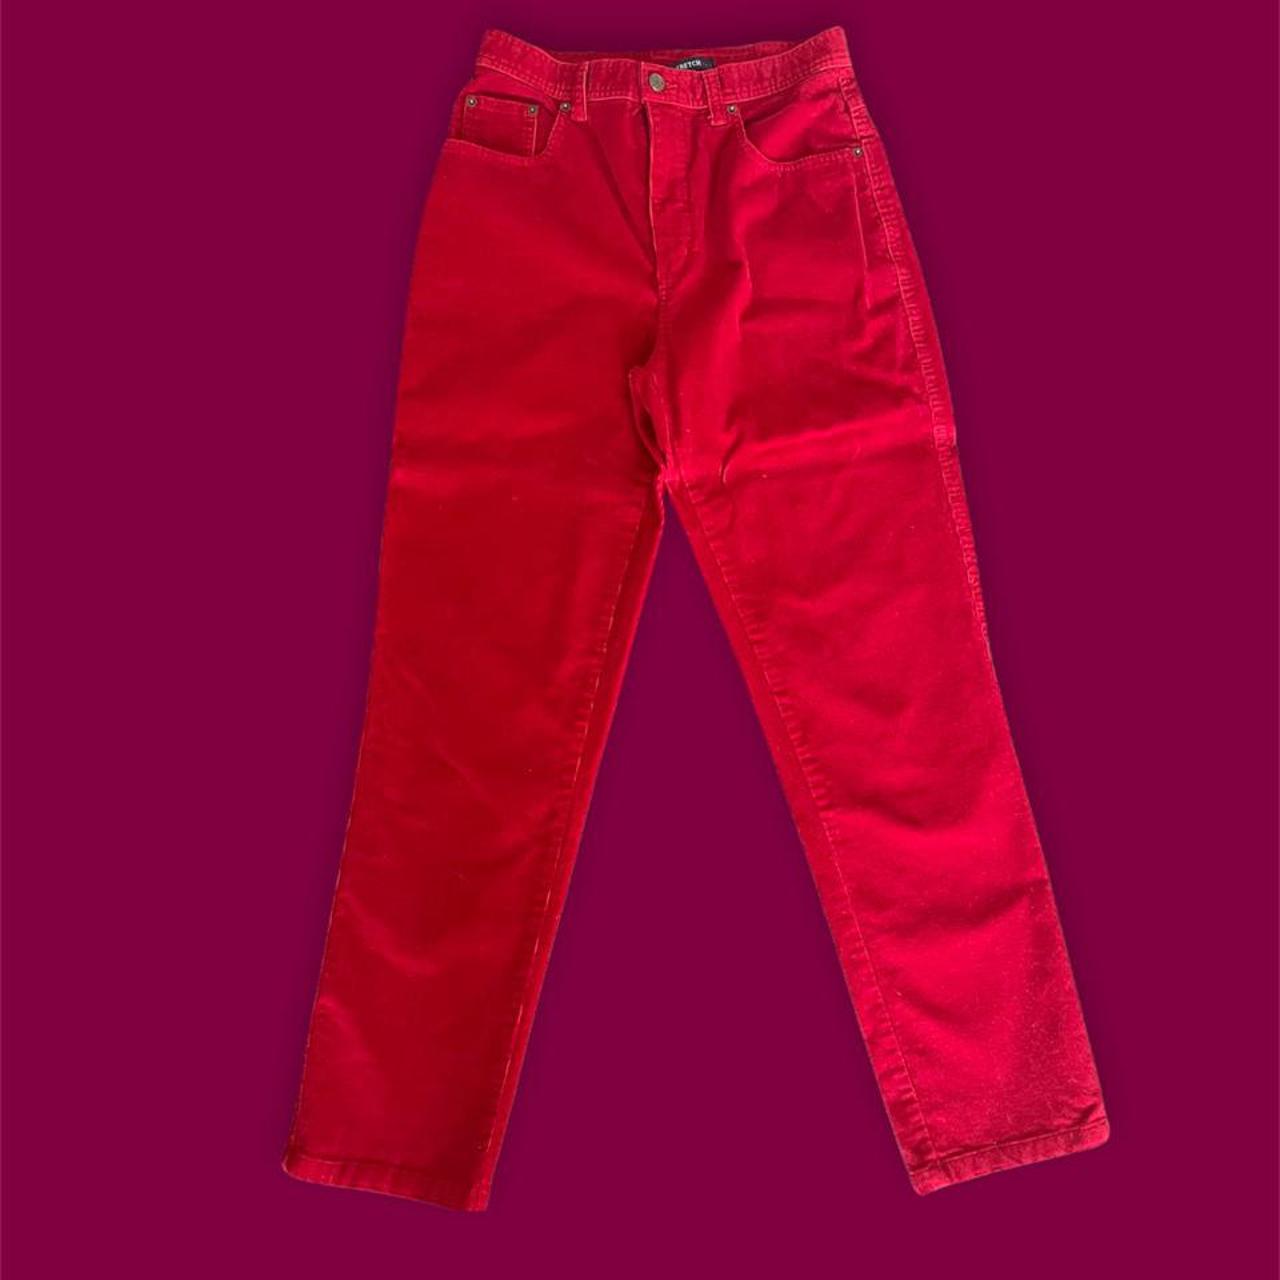 Product Image 1 - Bill blass red corduroy jeans
Stretch